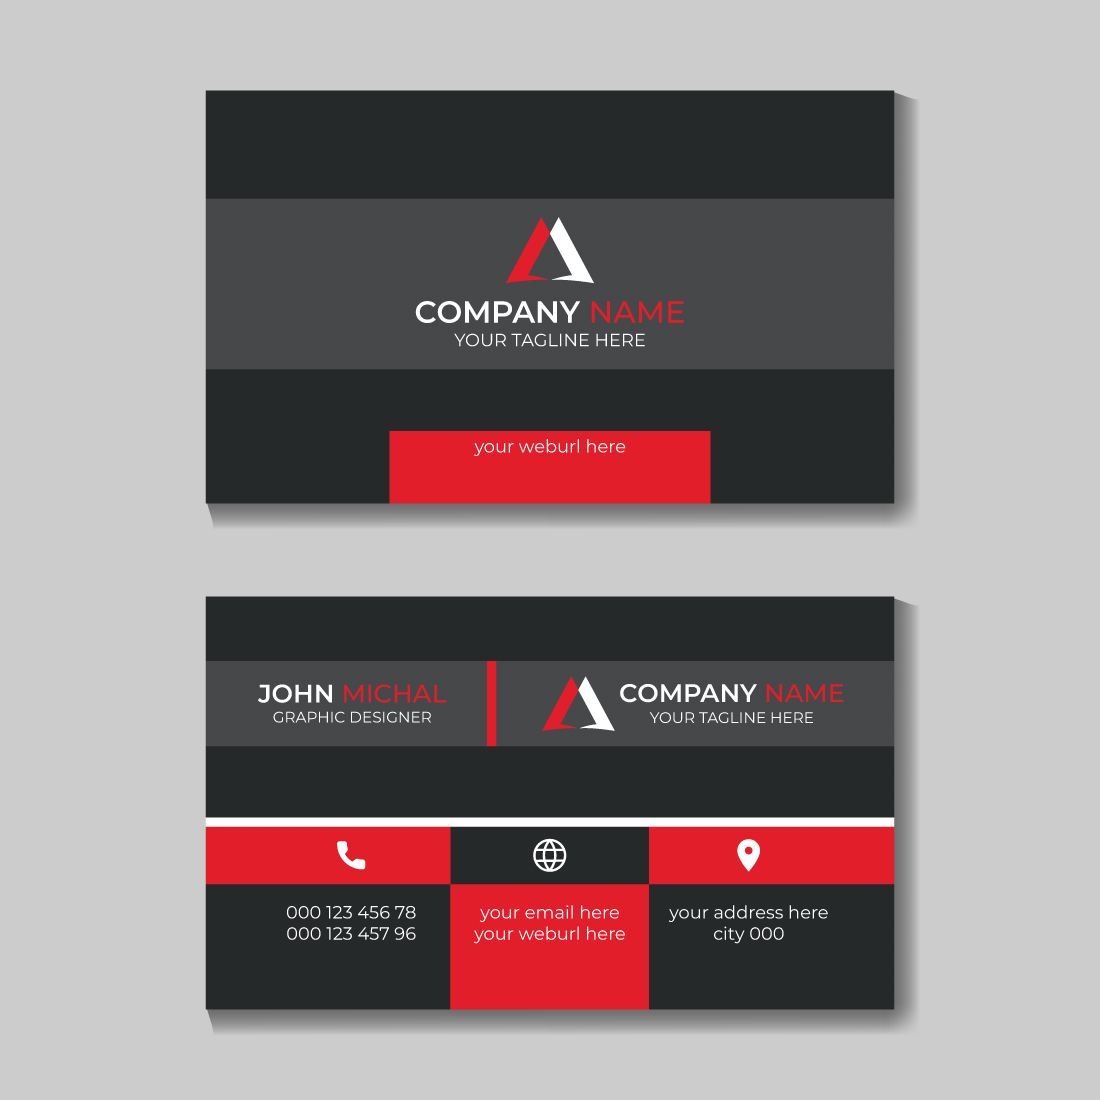 4 Stylish and Professional Business Card Design Templates